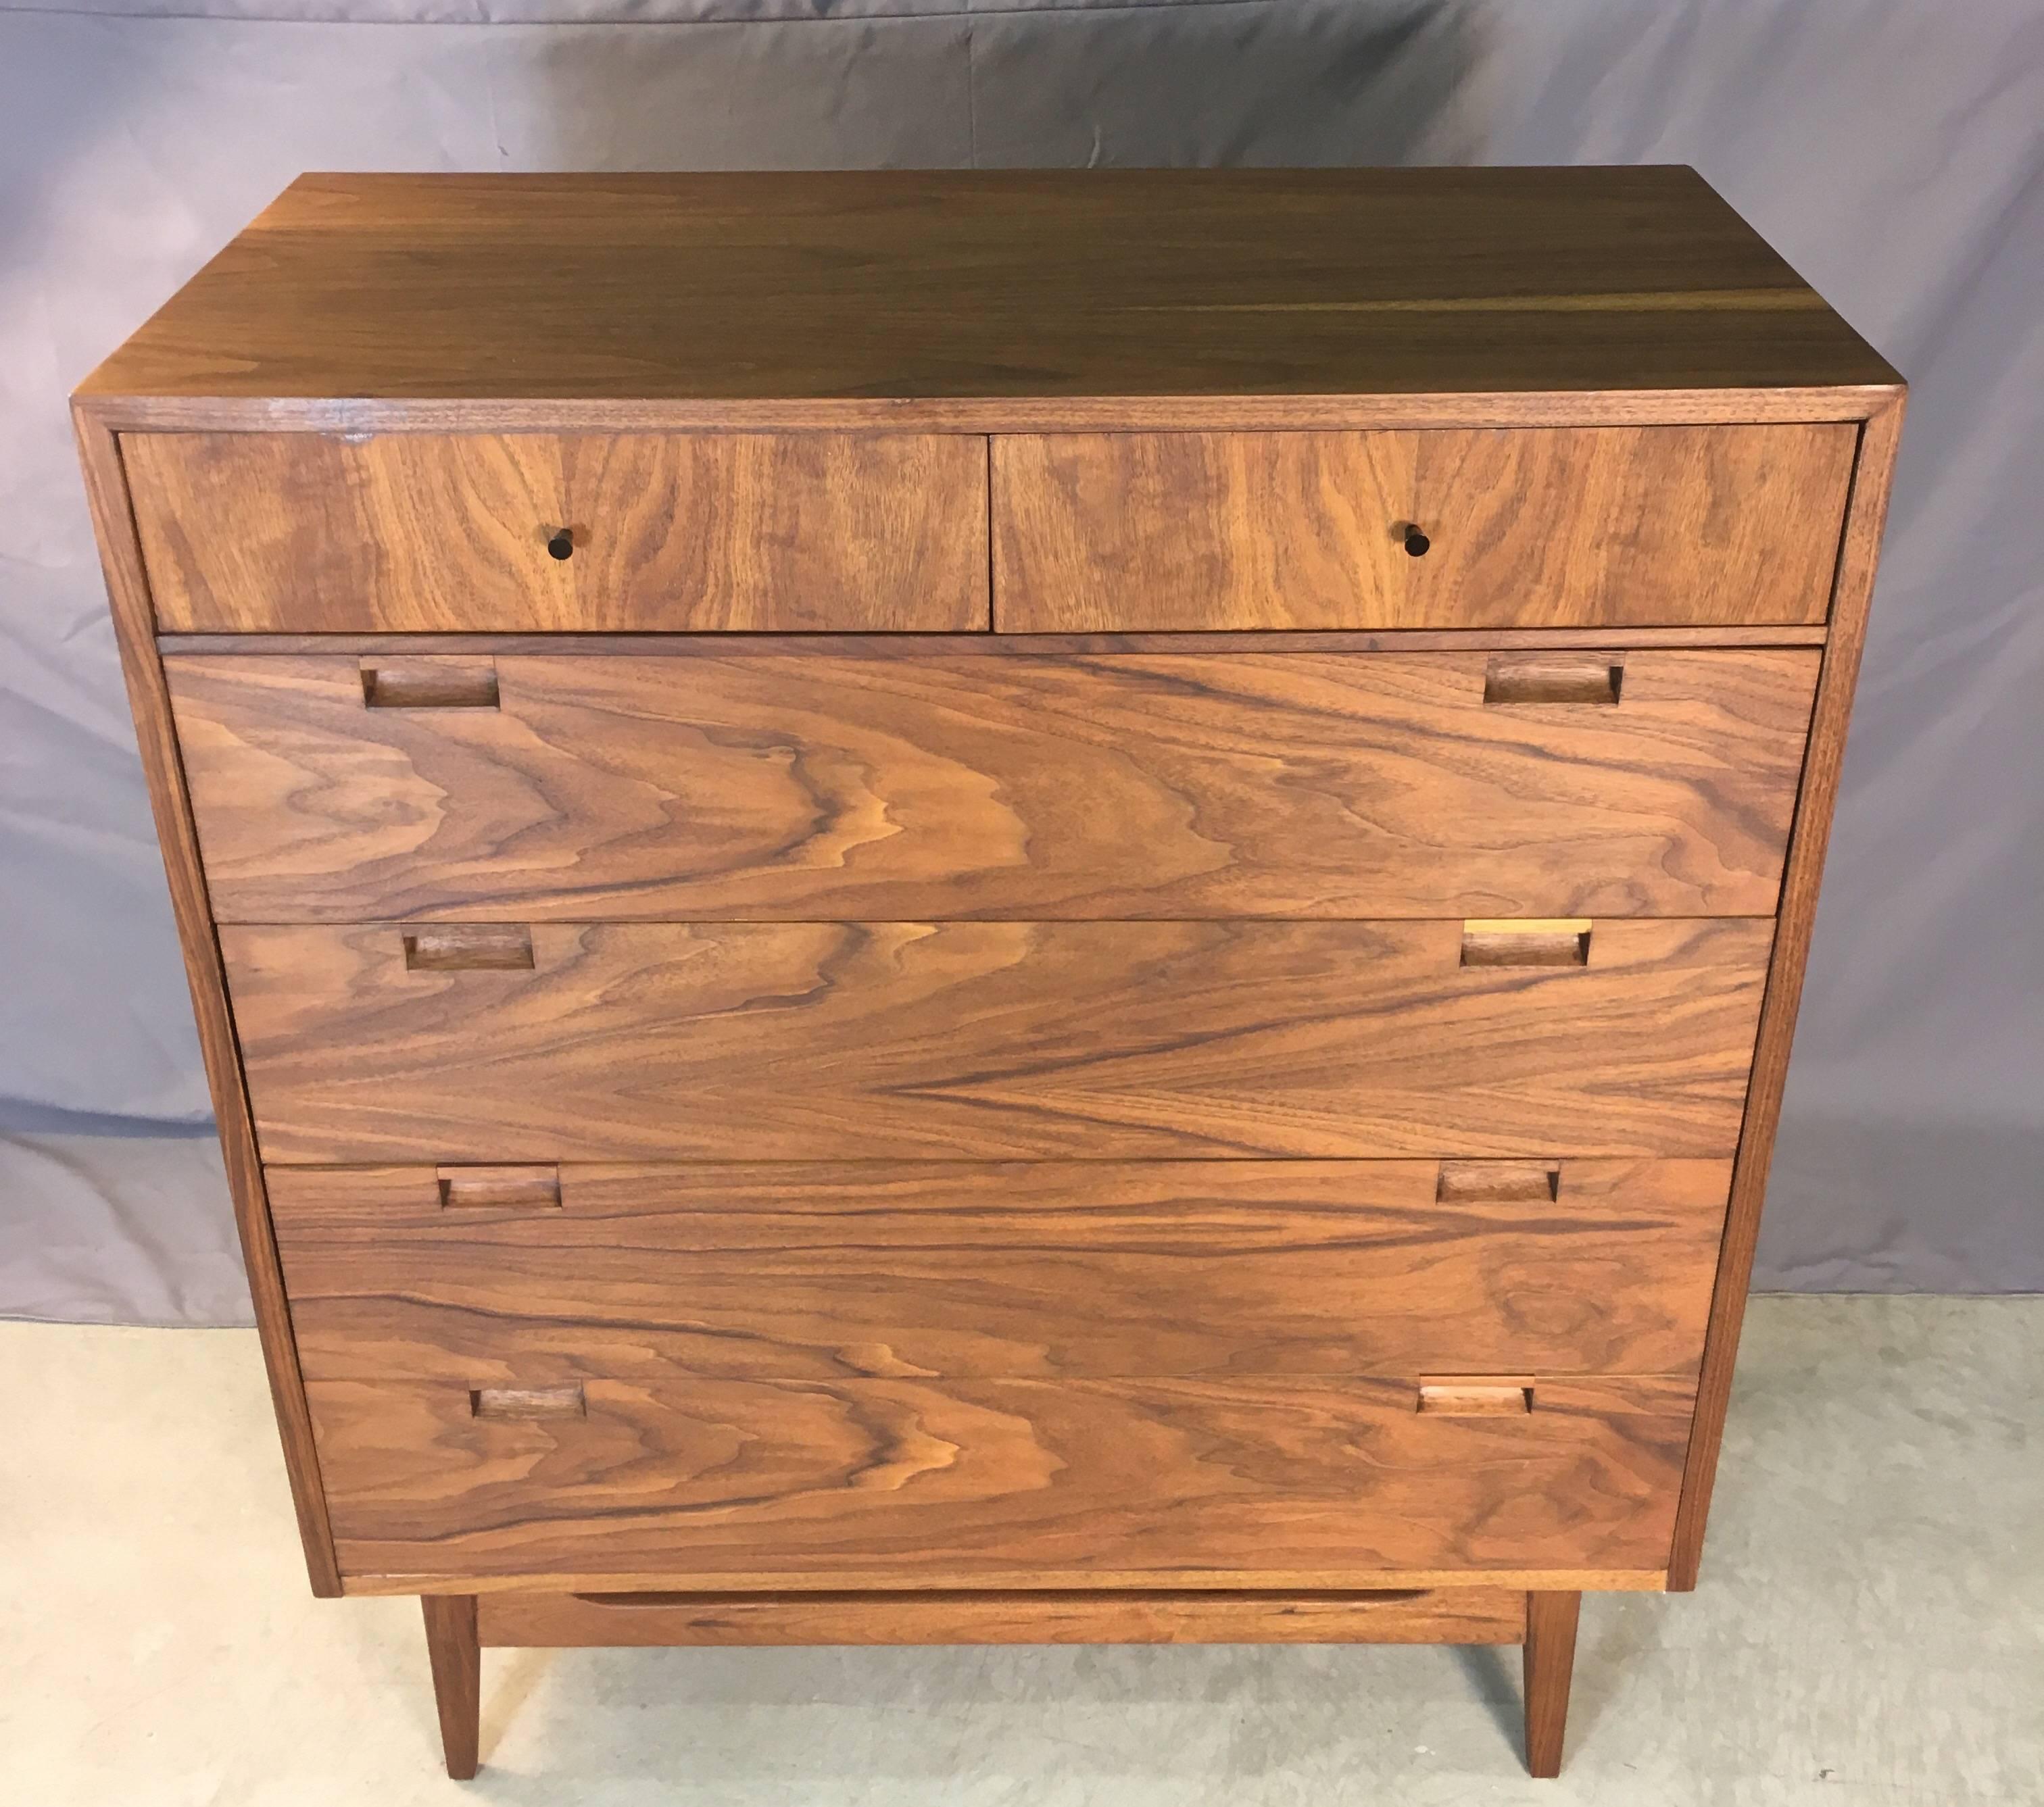 Vintage 1960s tall walnut dresser by American of Martinsville. The dresser has six drawers for storage and black metal pulls. Marked. In refinished condition.